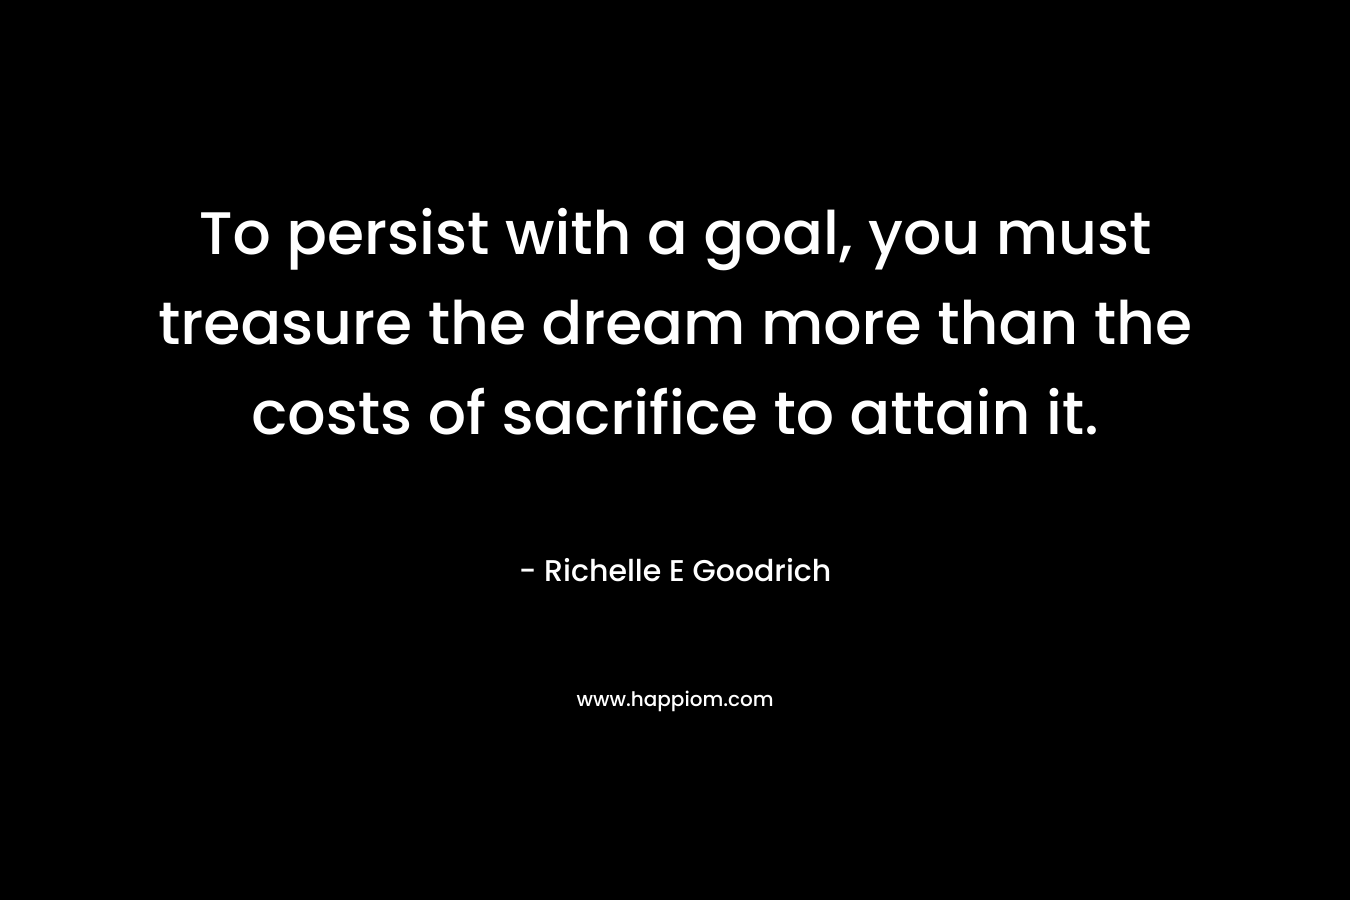 To persist with a goal, you must treasure the dream more than the costs of sacrifice to attain it. – Richelle E Goodrich